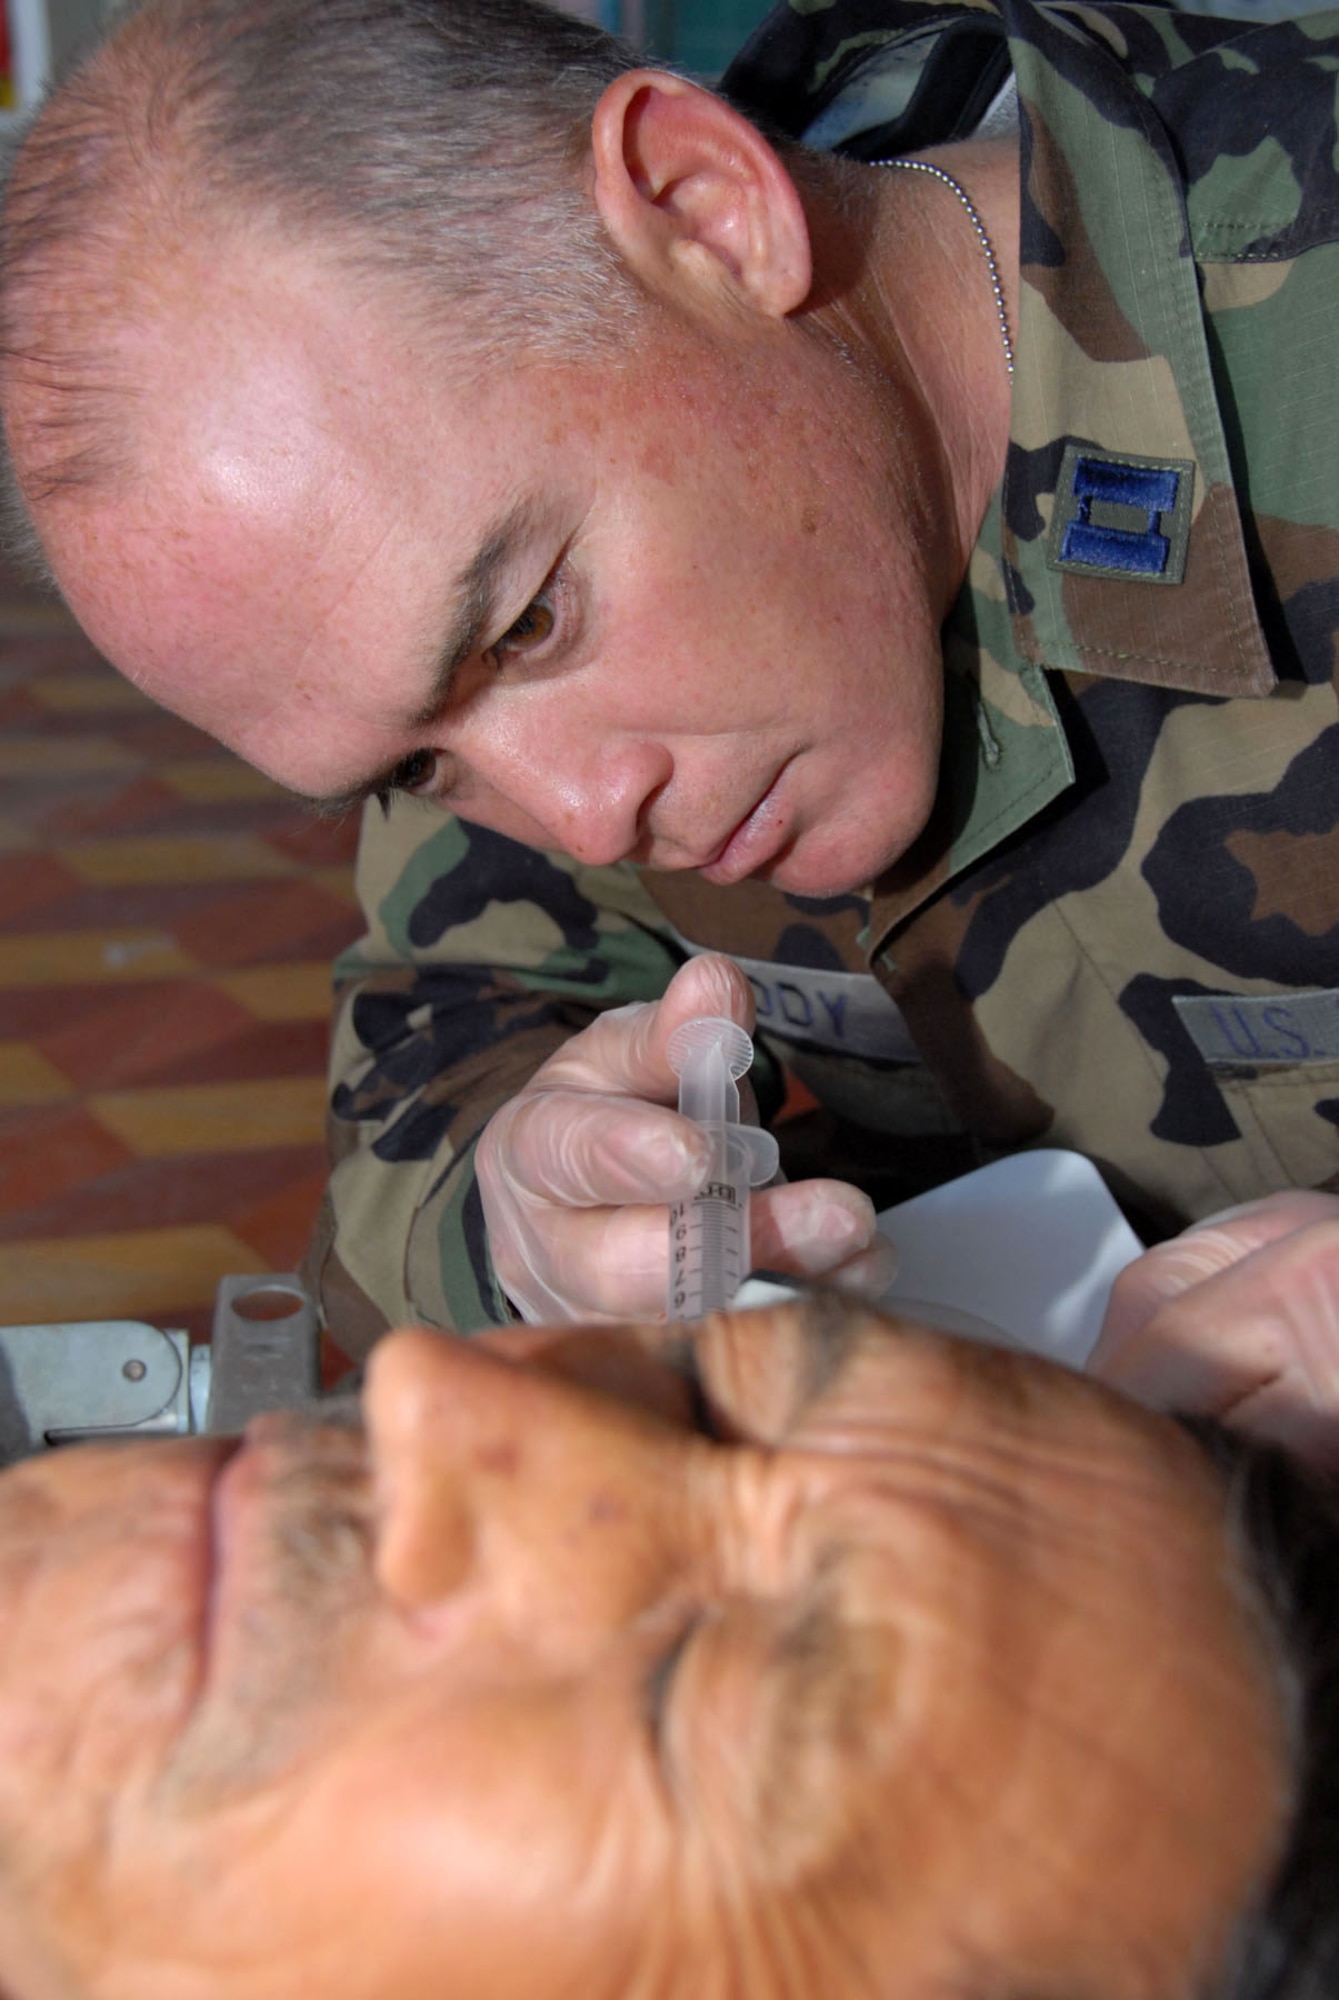 Capt. Michael Priddy irrigates the ear canal a Guatemalan patient during the New Horizons Medical Readiness Training Exercise conducted April 14 through 28 in the region of San Marcos, Guatemala. Captain Priddy is a physician assistant with the 445th Aerospace Medicine Squadron, Wright Patterson Air Force Base, Ohio. (U.S. Air Force photo/Master Sgt. Chance C. Babin)
